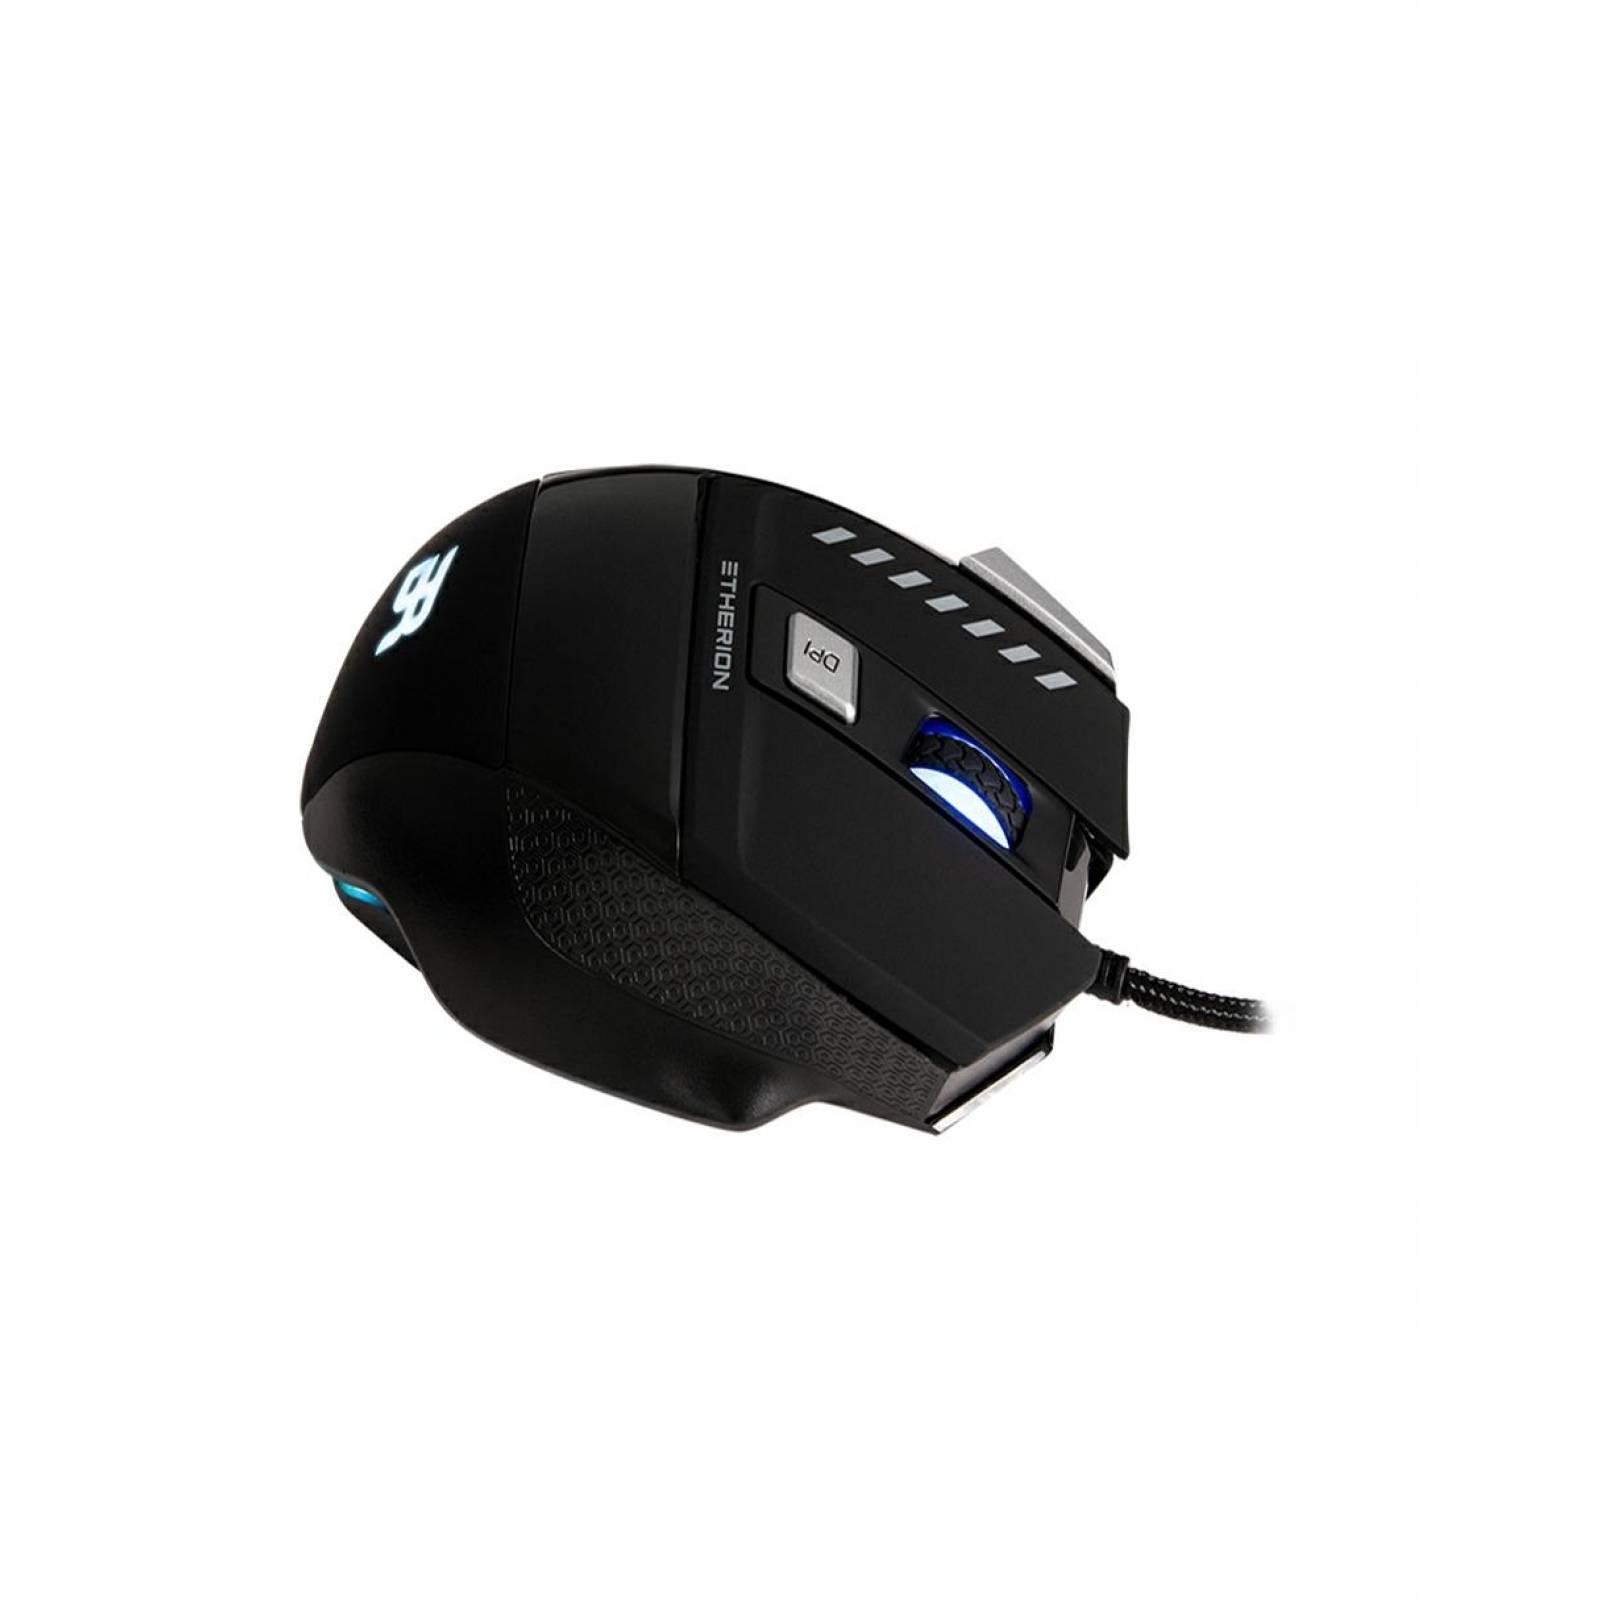 Mouse Gamer Balam Rush Etherion 